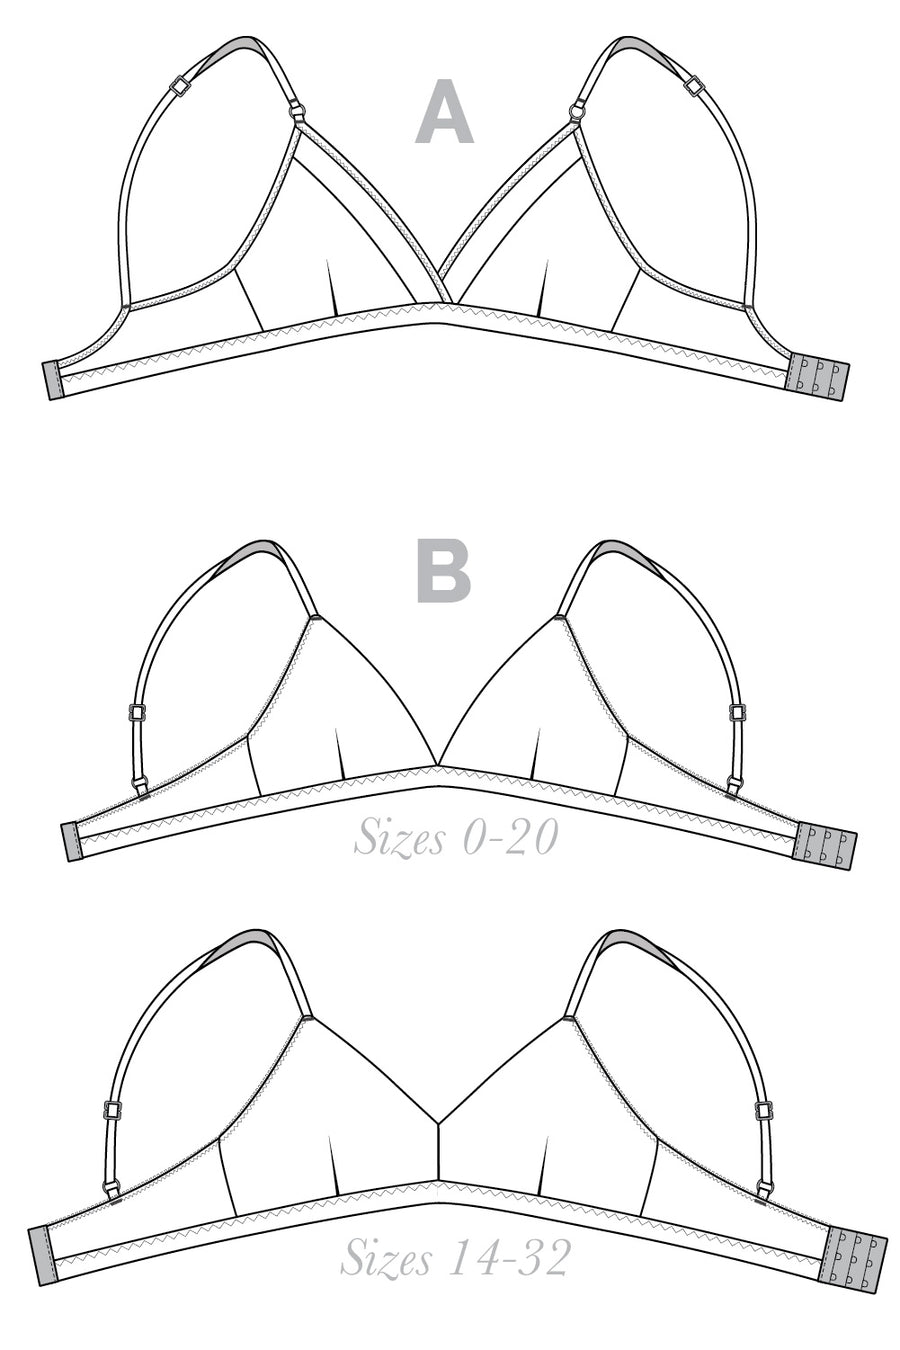 Flat OLD BAY Can Pattern Outline / Sports Bra